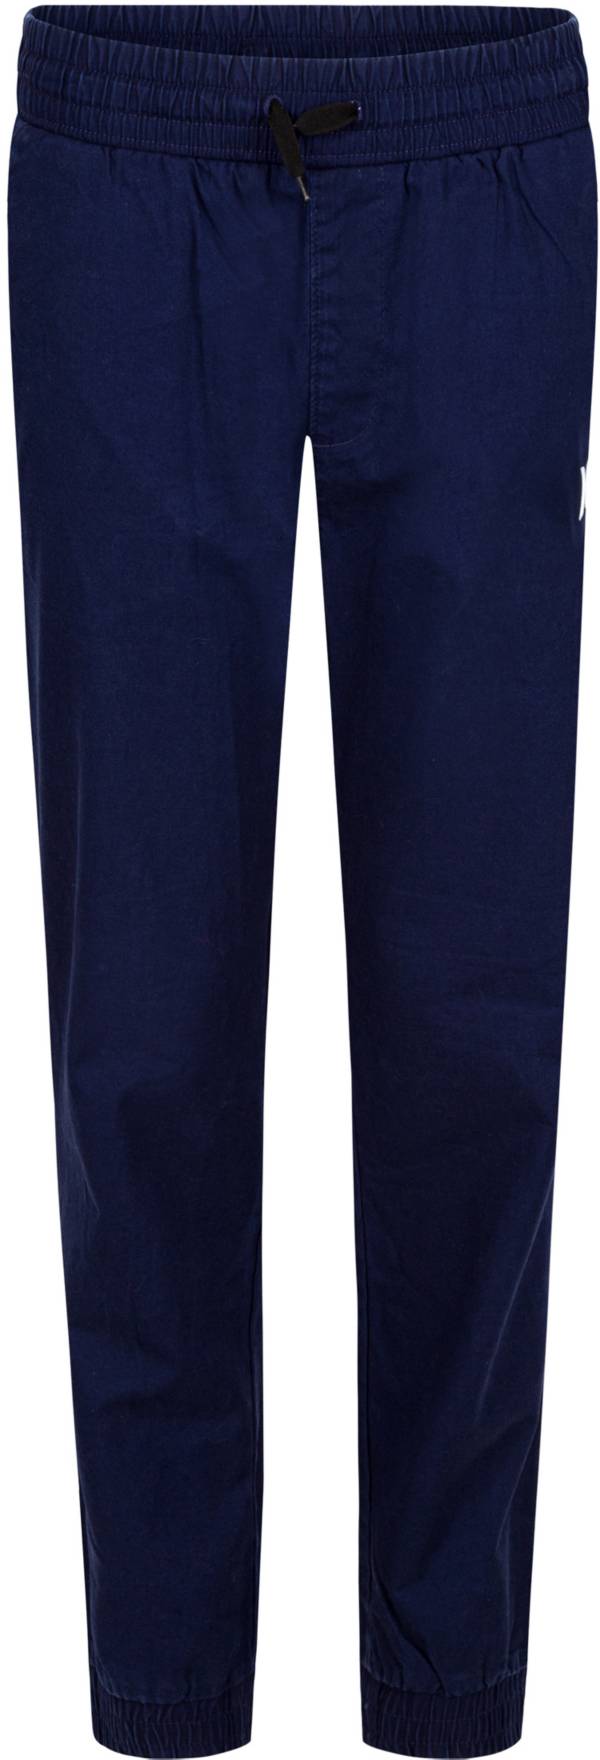 Hurley Boys' Saltwater Wash Joggers product image